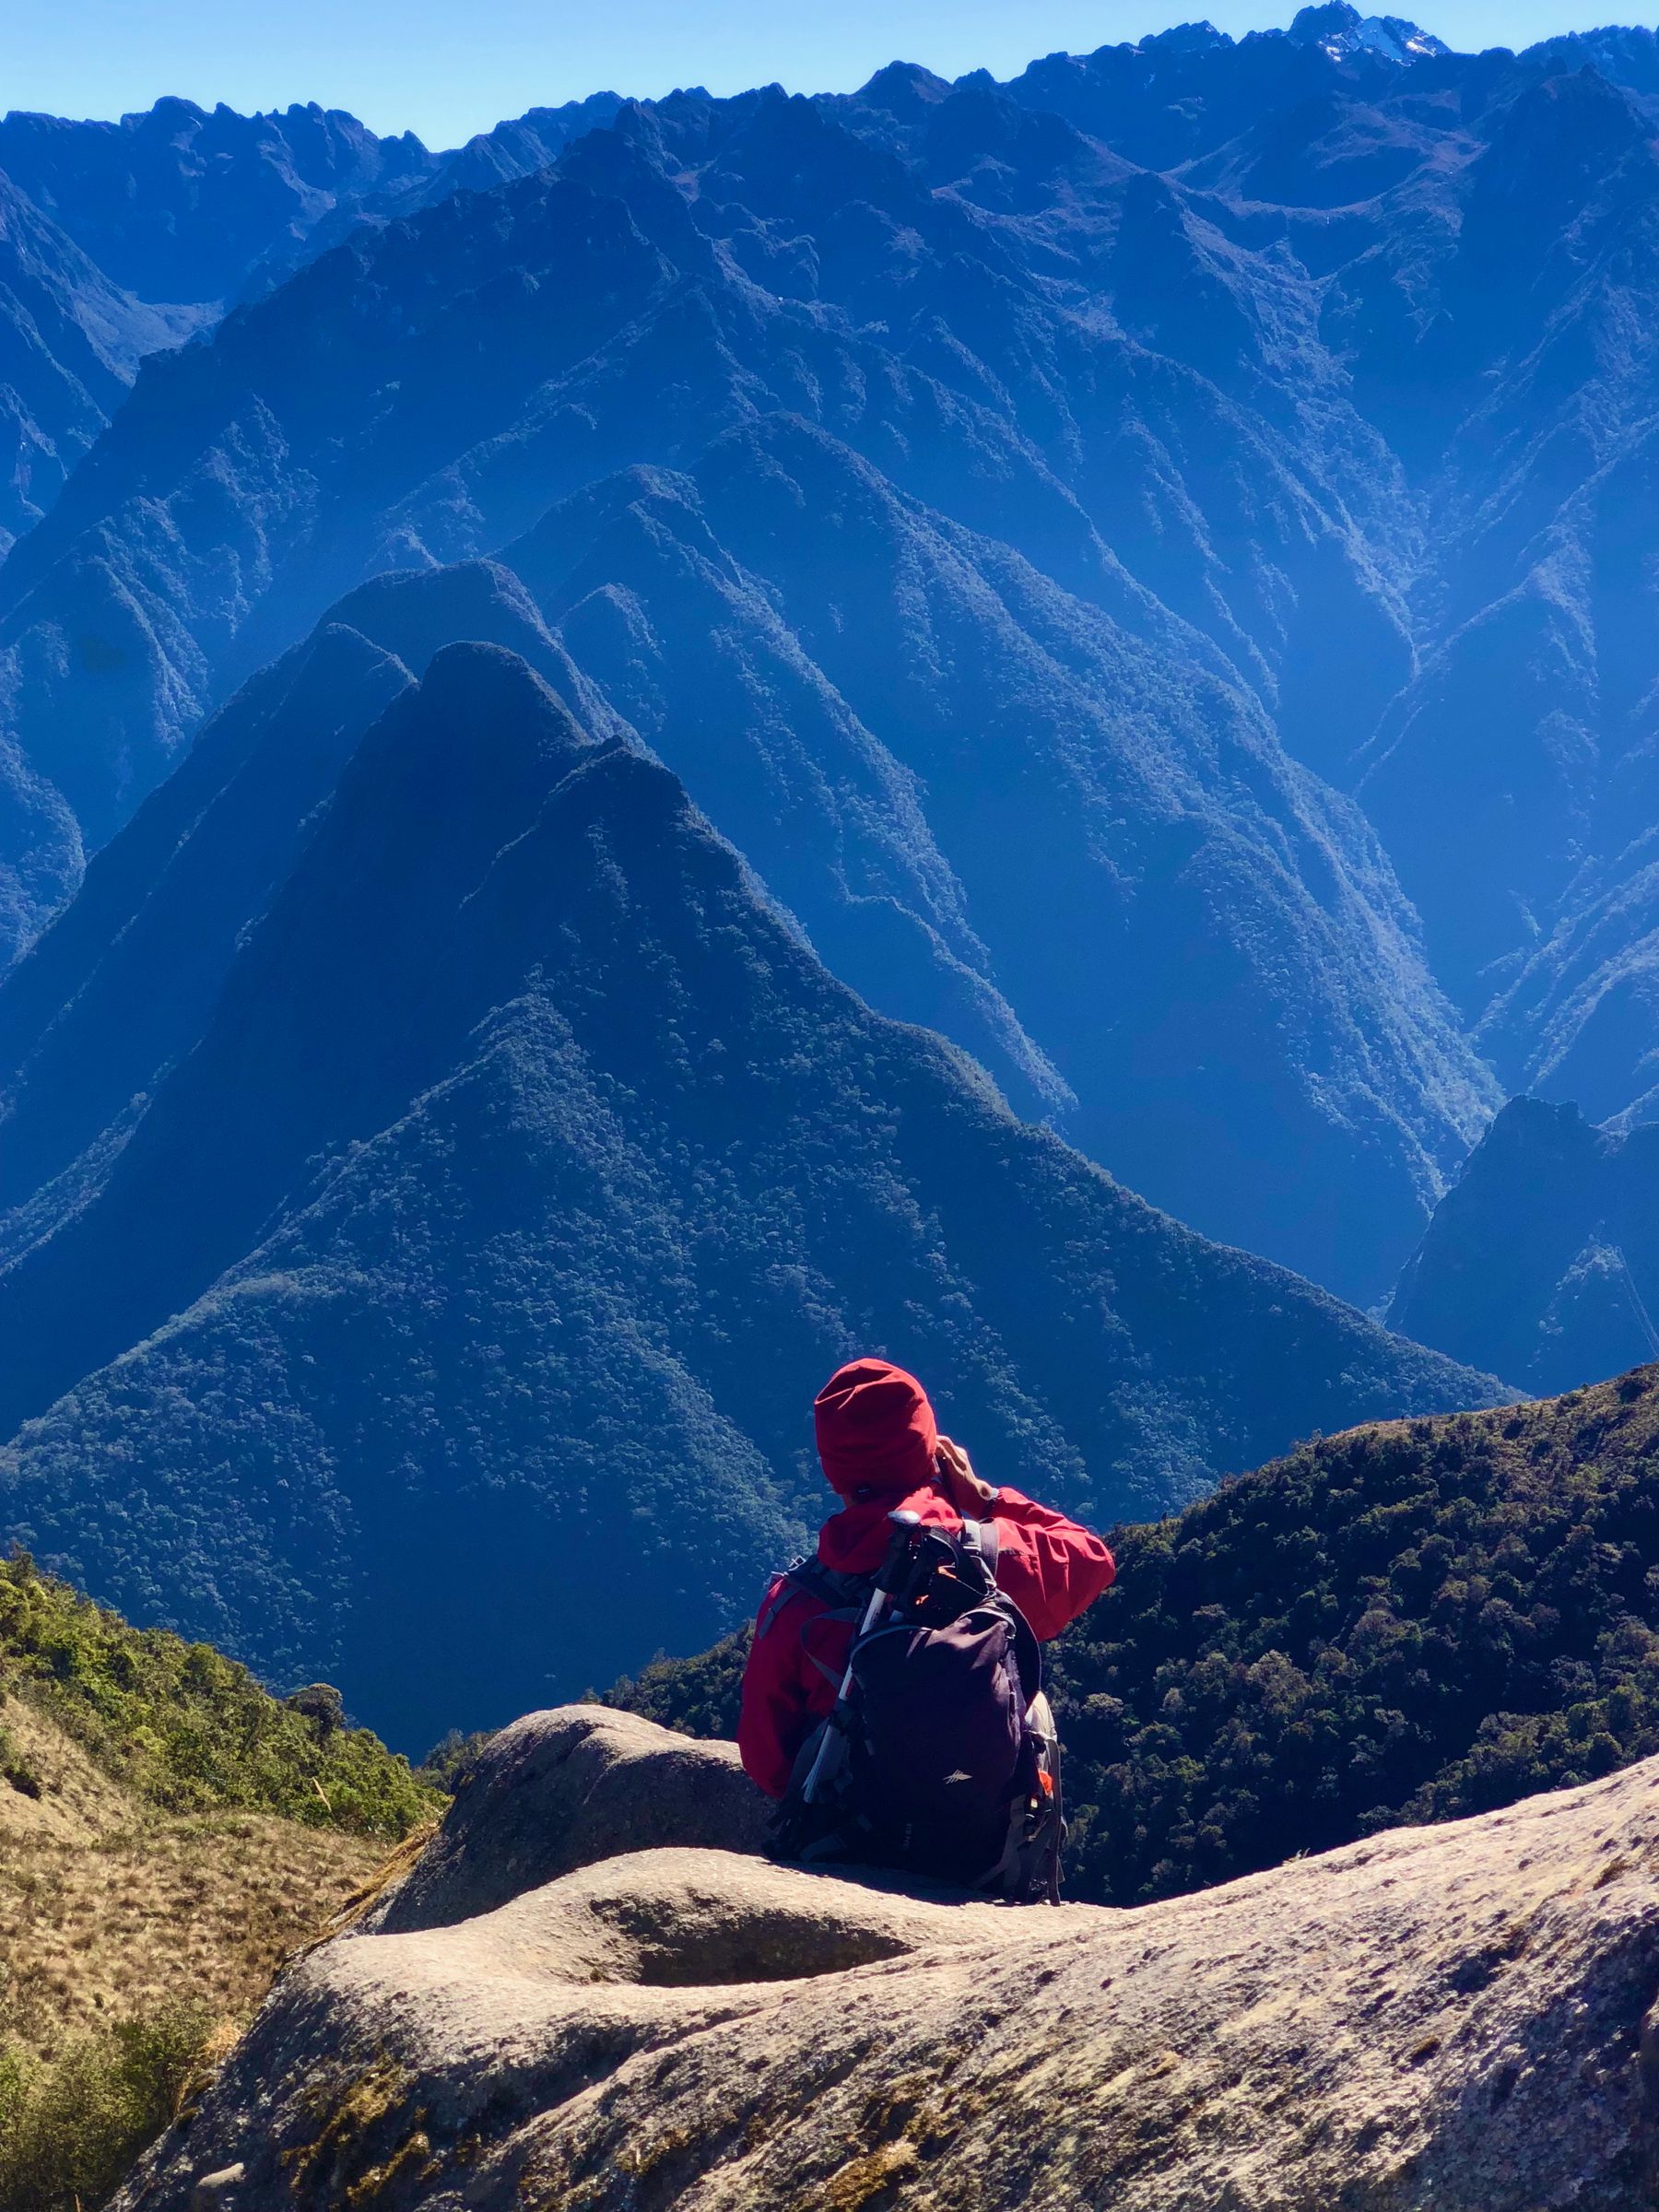 Guide in Red Sweatshirt Finds Cell Service in the Andes Mountains